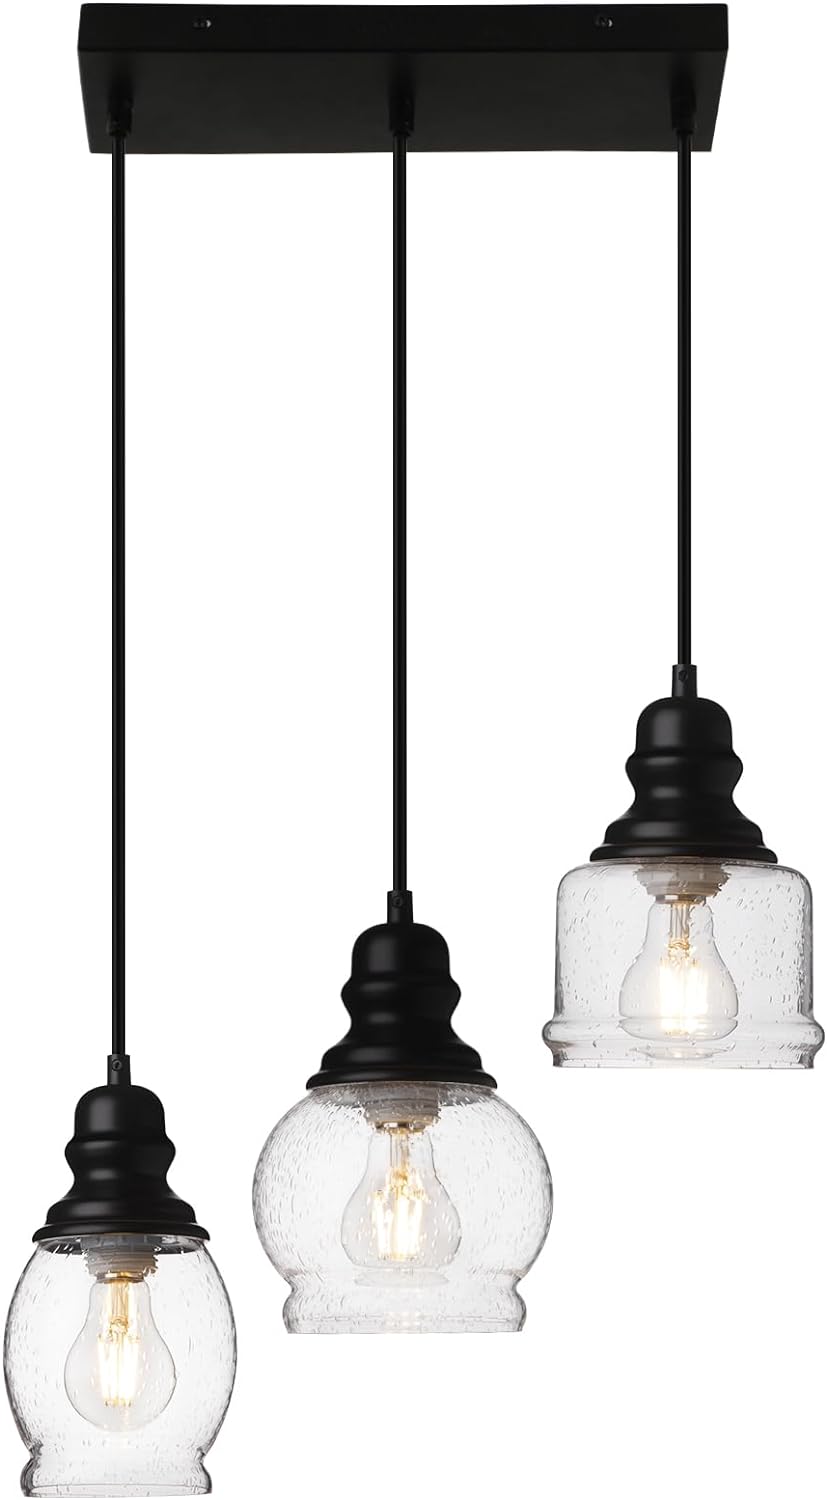 Industrial Pendant Lighting, Pendant Lights for Kitchen Island 3 Light Glass Pendant Light Fixture with Seeded Glass Shade, Adjustable Cord Farmhouse Ceiling Light Black Metal finish Linear Chandelier (Bl